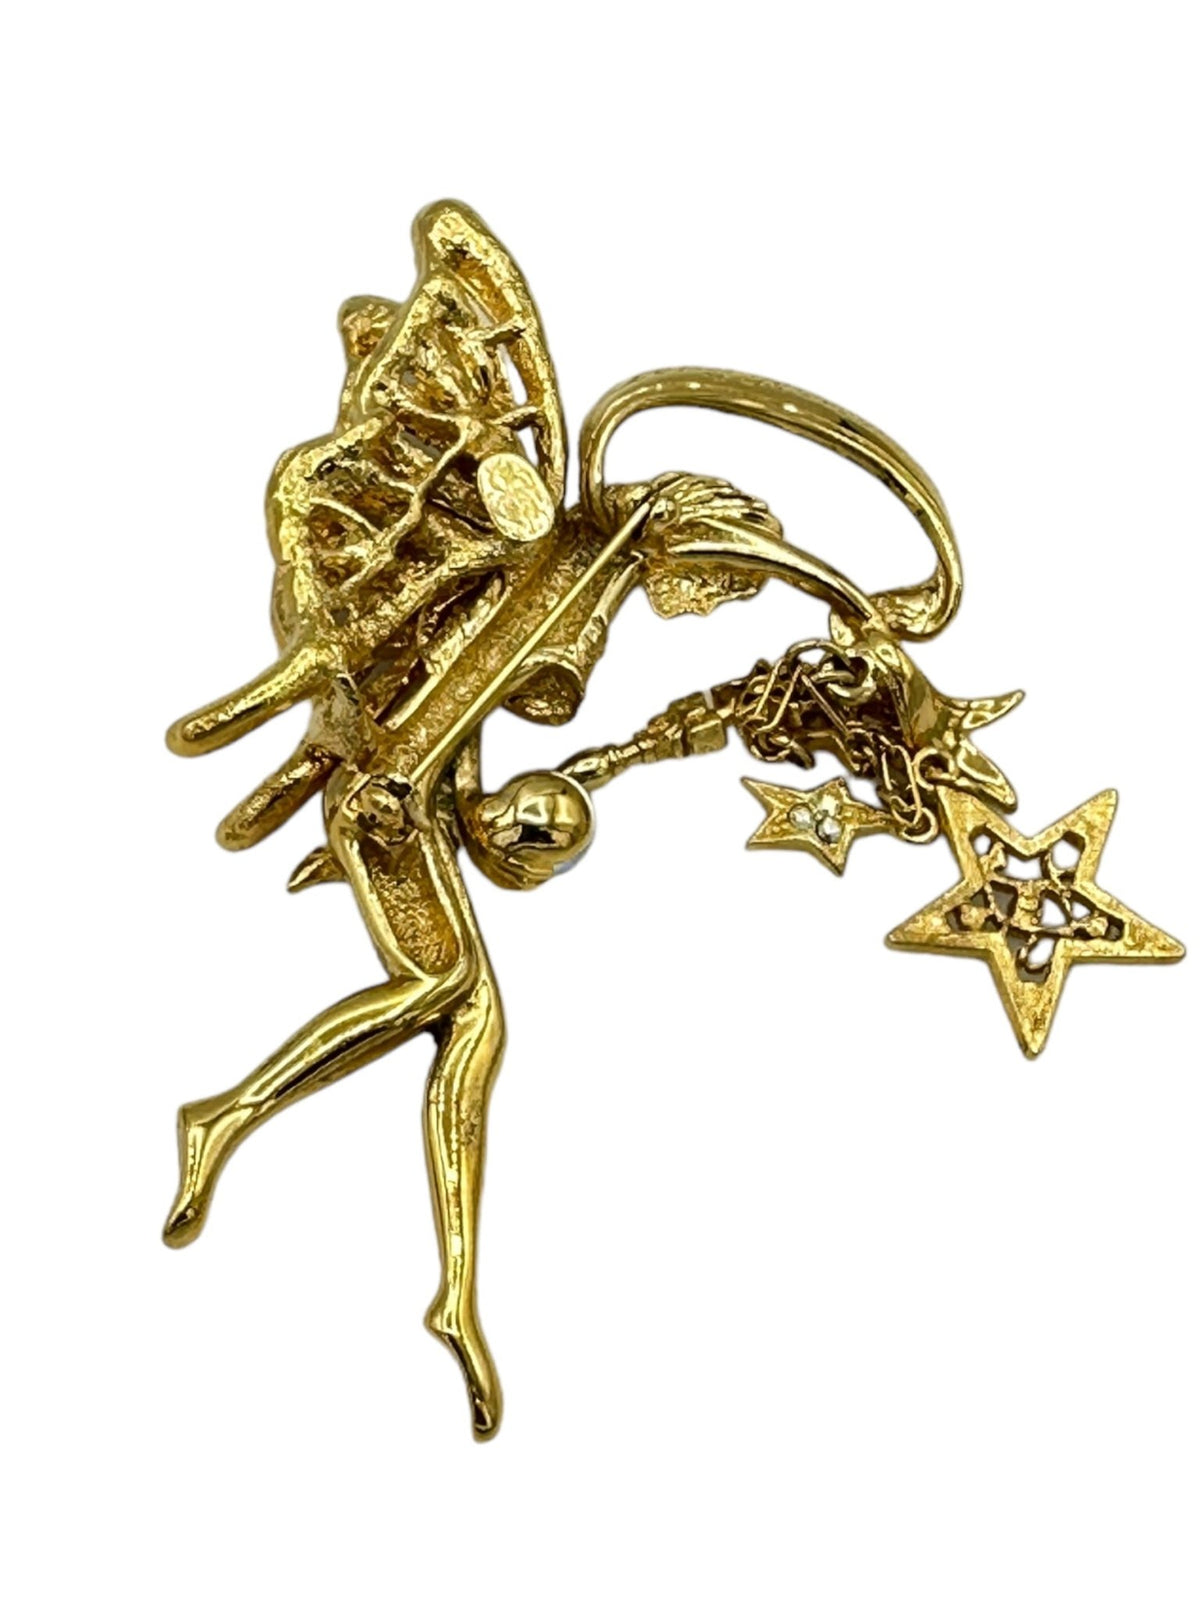 Gold Kirks Folly Large Fairy Godmother Charm AB Rhinestone Brooch - 24 Wishes Vintage Jewelry